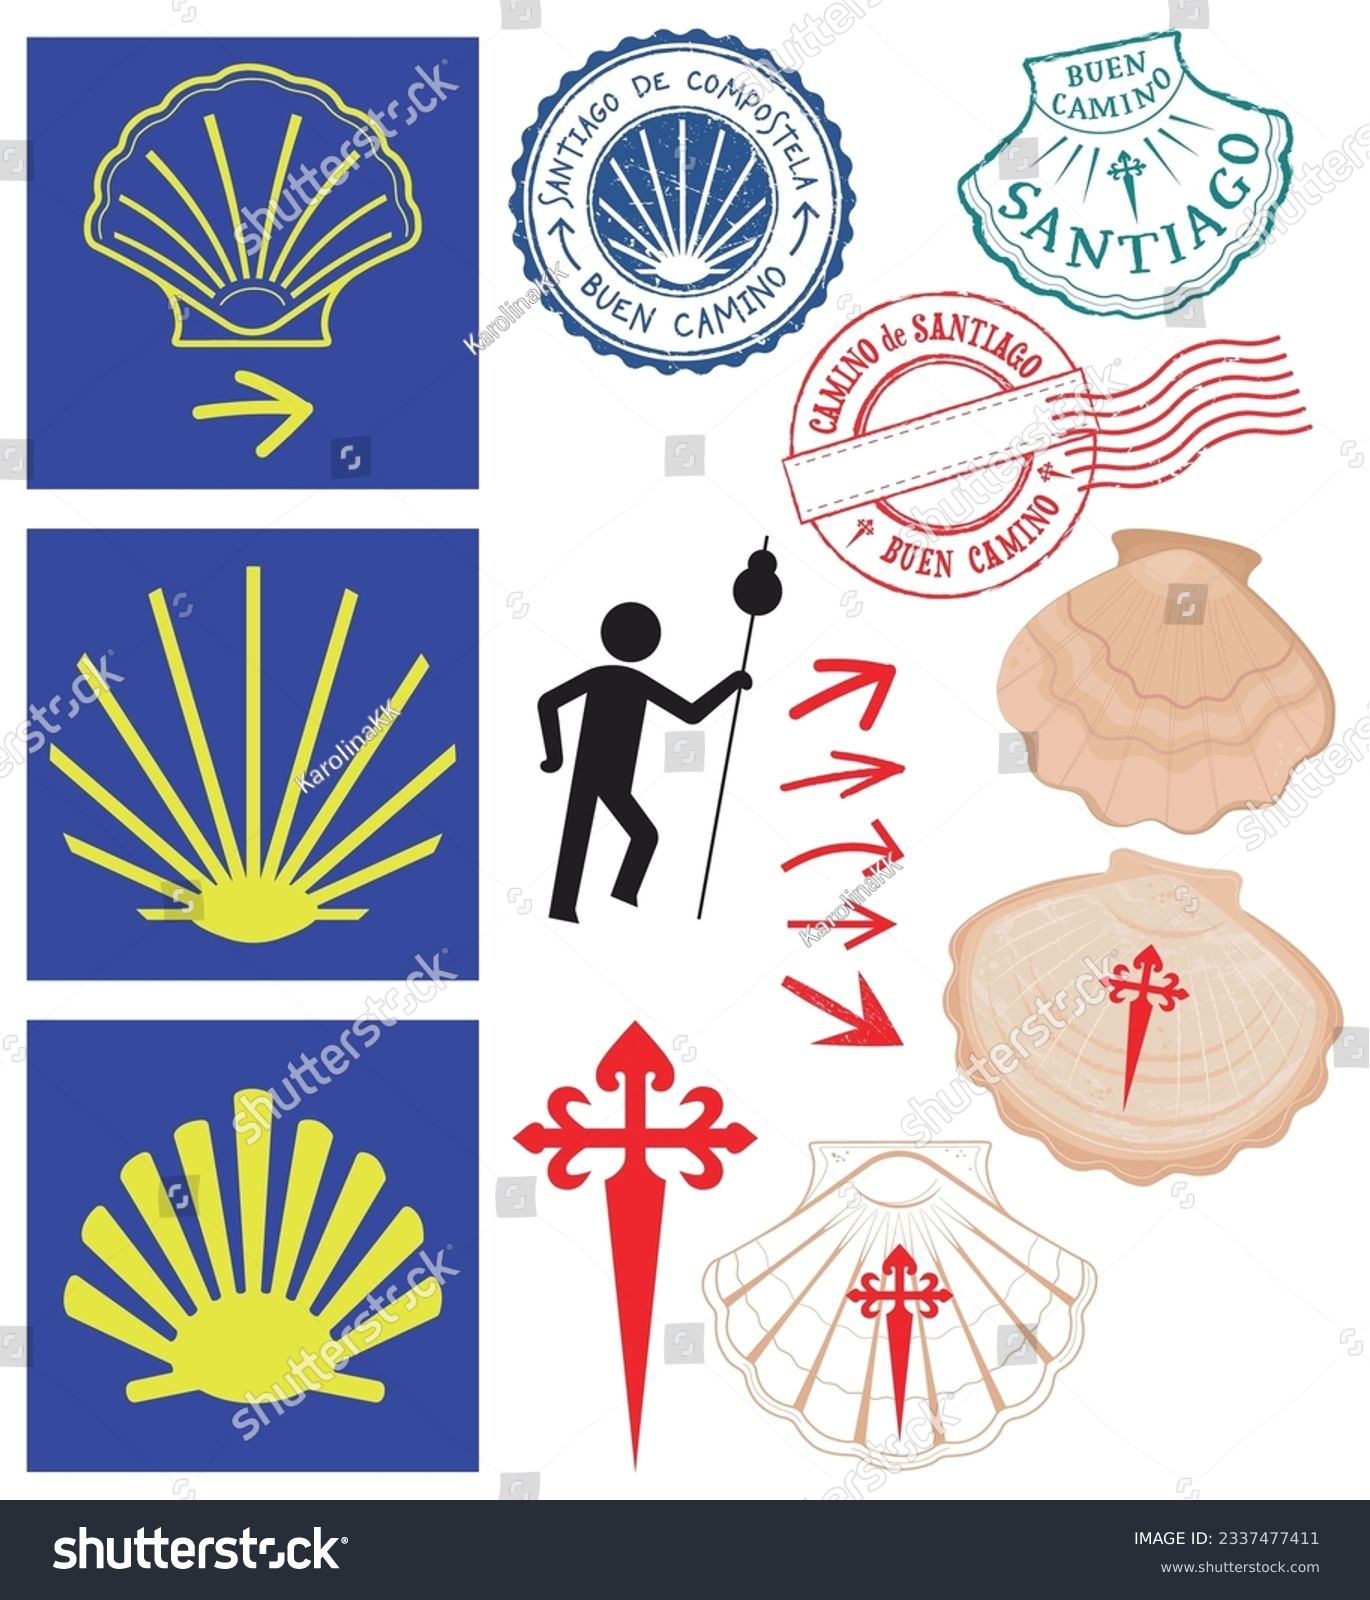 SVG of Camino de Santiago Compostela in Spain: set of stamps and symbols, marian shell, pilgrim route svg